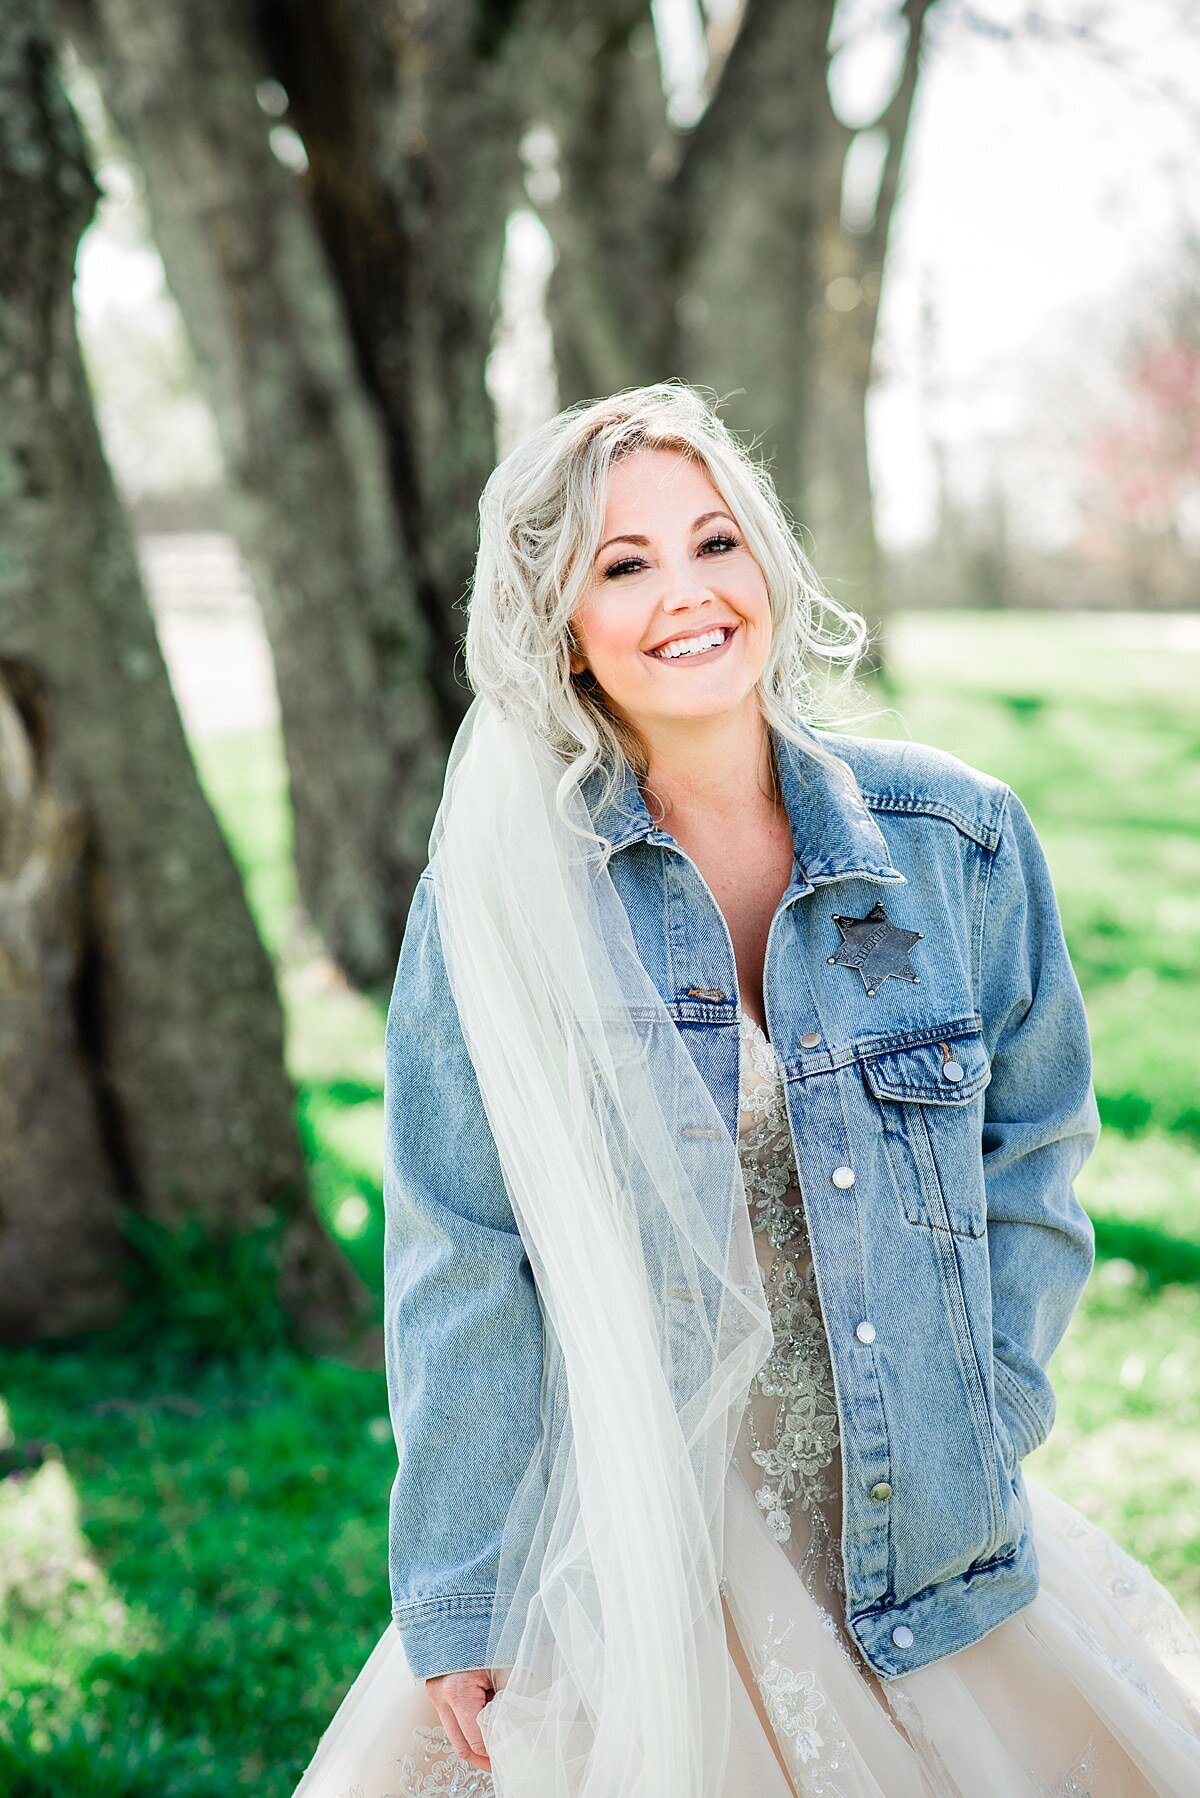 The bride, wearing a long sheer veil and denim jacket smiles up at the camera as she stands beneath a tree.